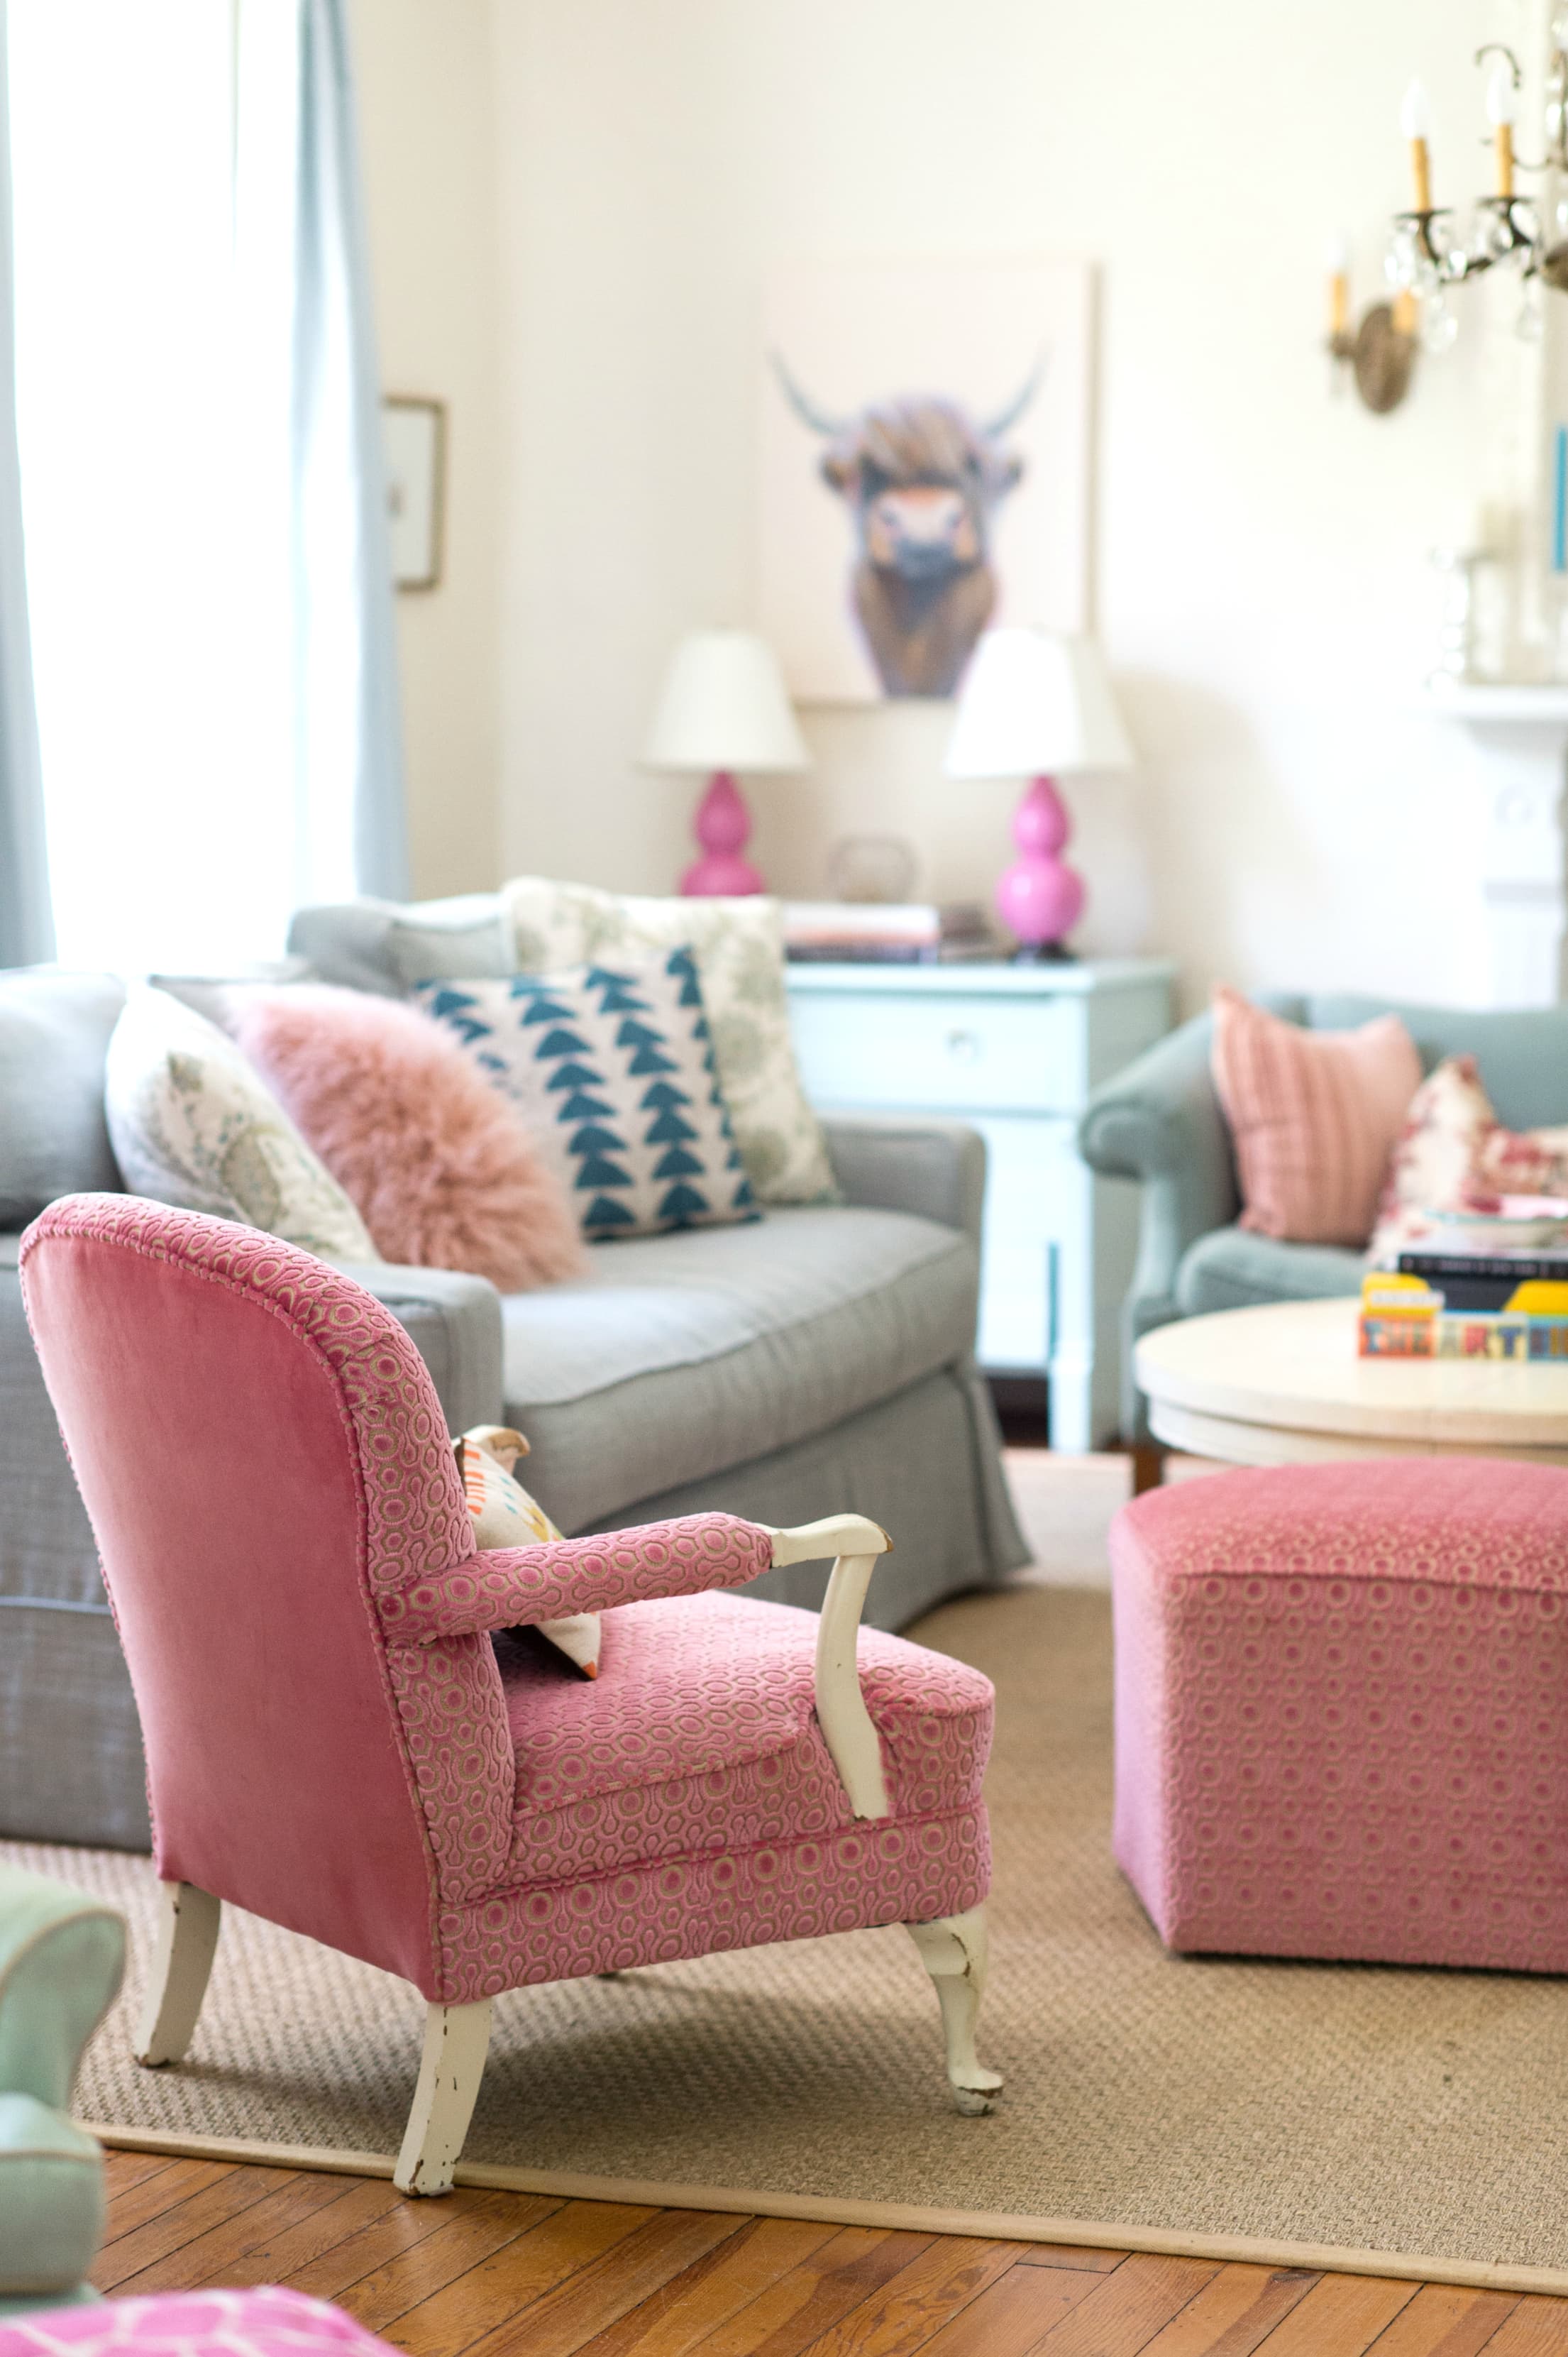 Why Baker-Miller Pink Is the Most Calming Color, According to